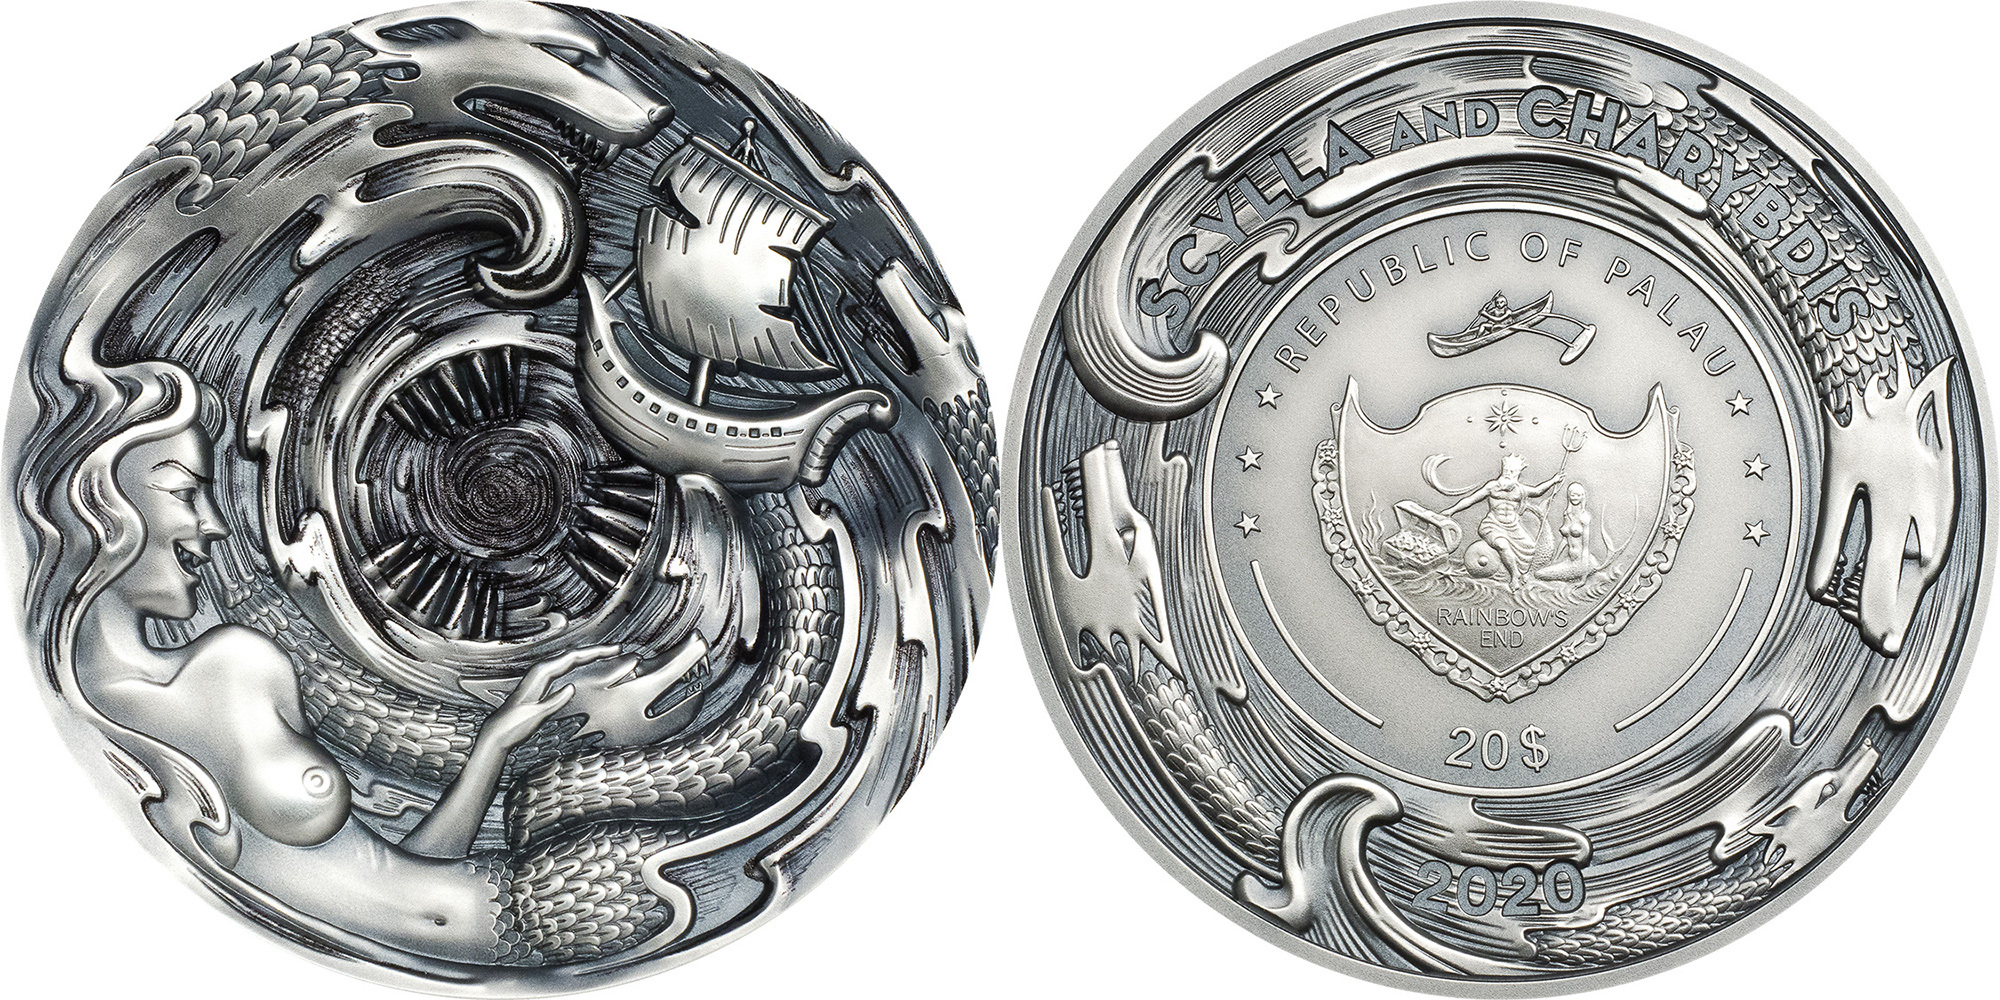 This stunning 3 Oz Silver coin is the second issue from the “Evil Within” s...